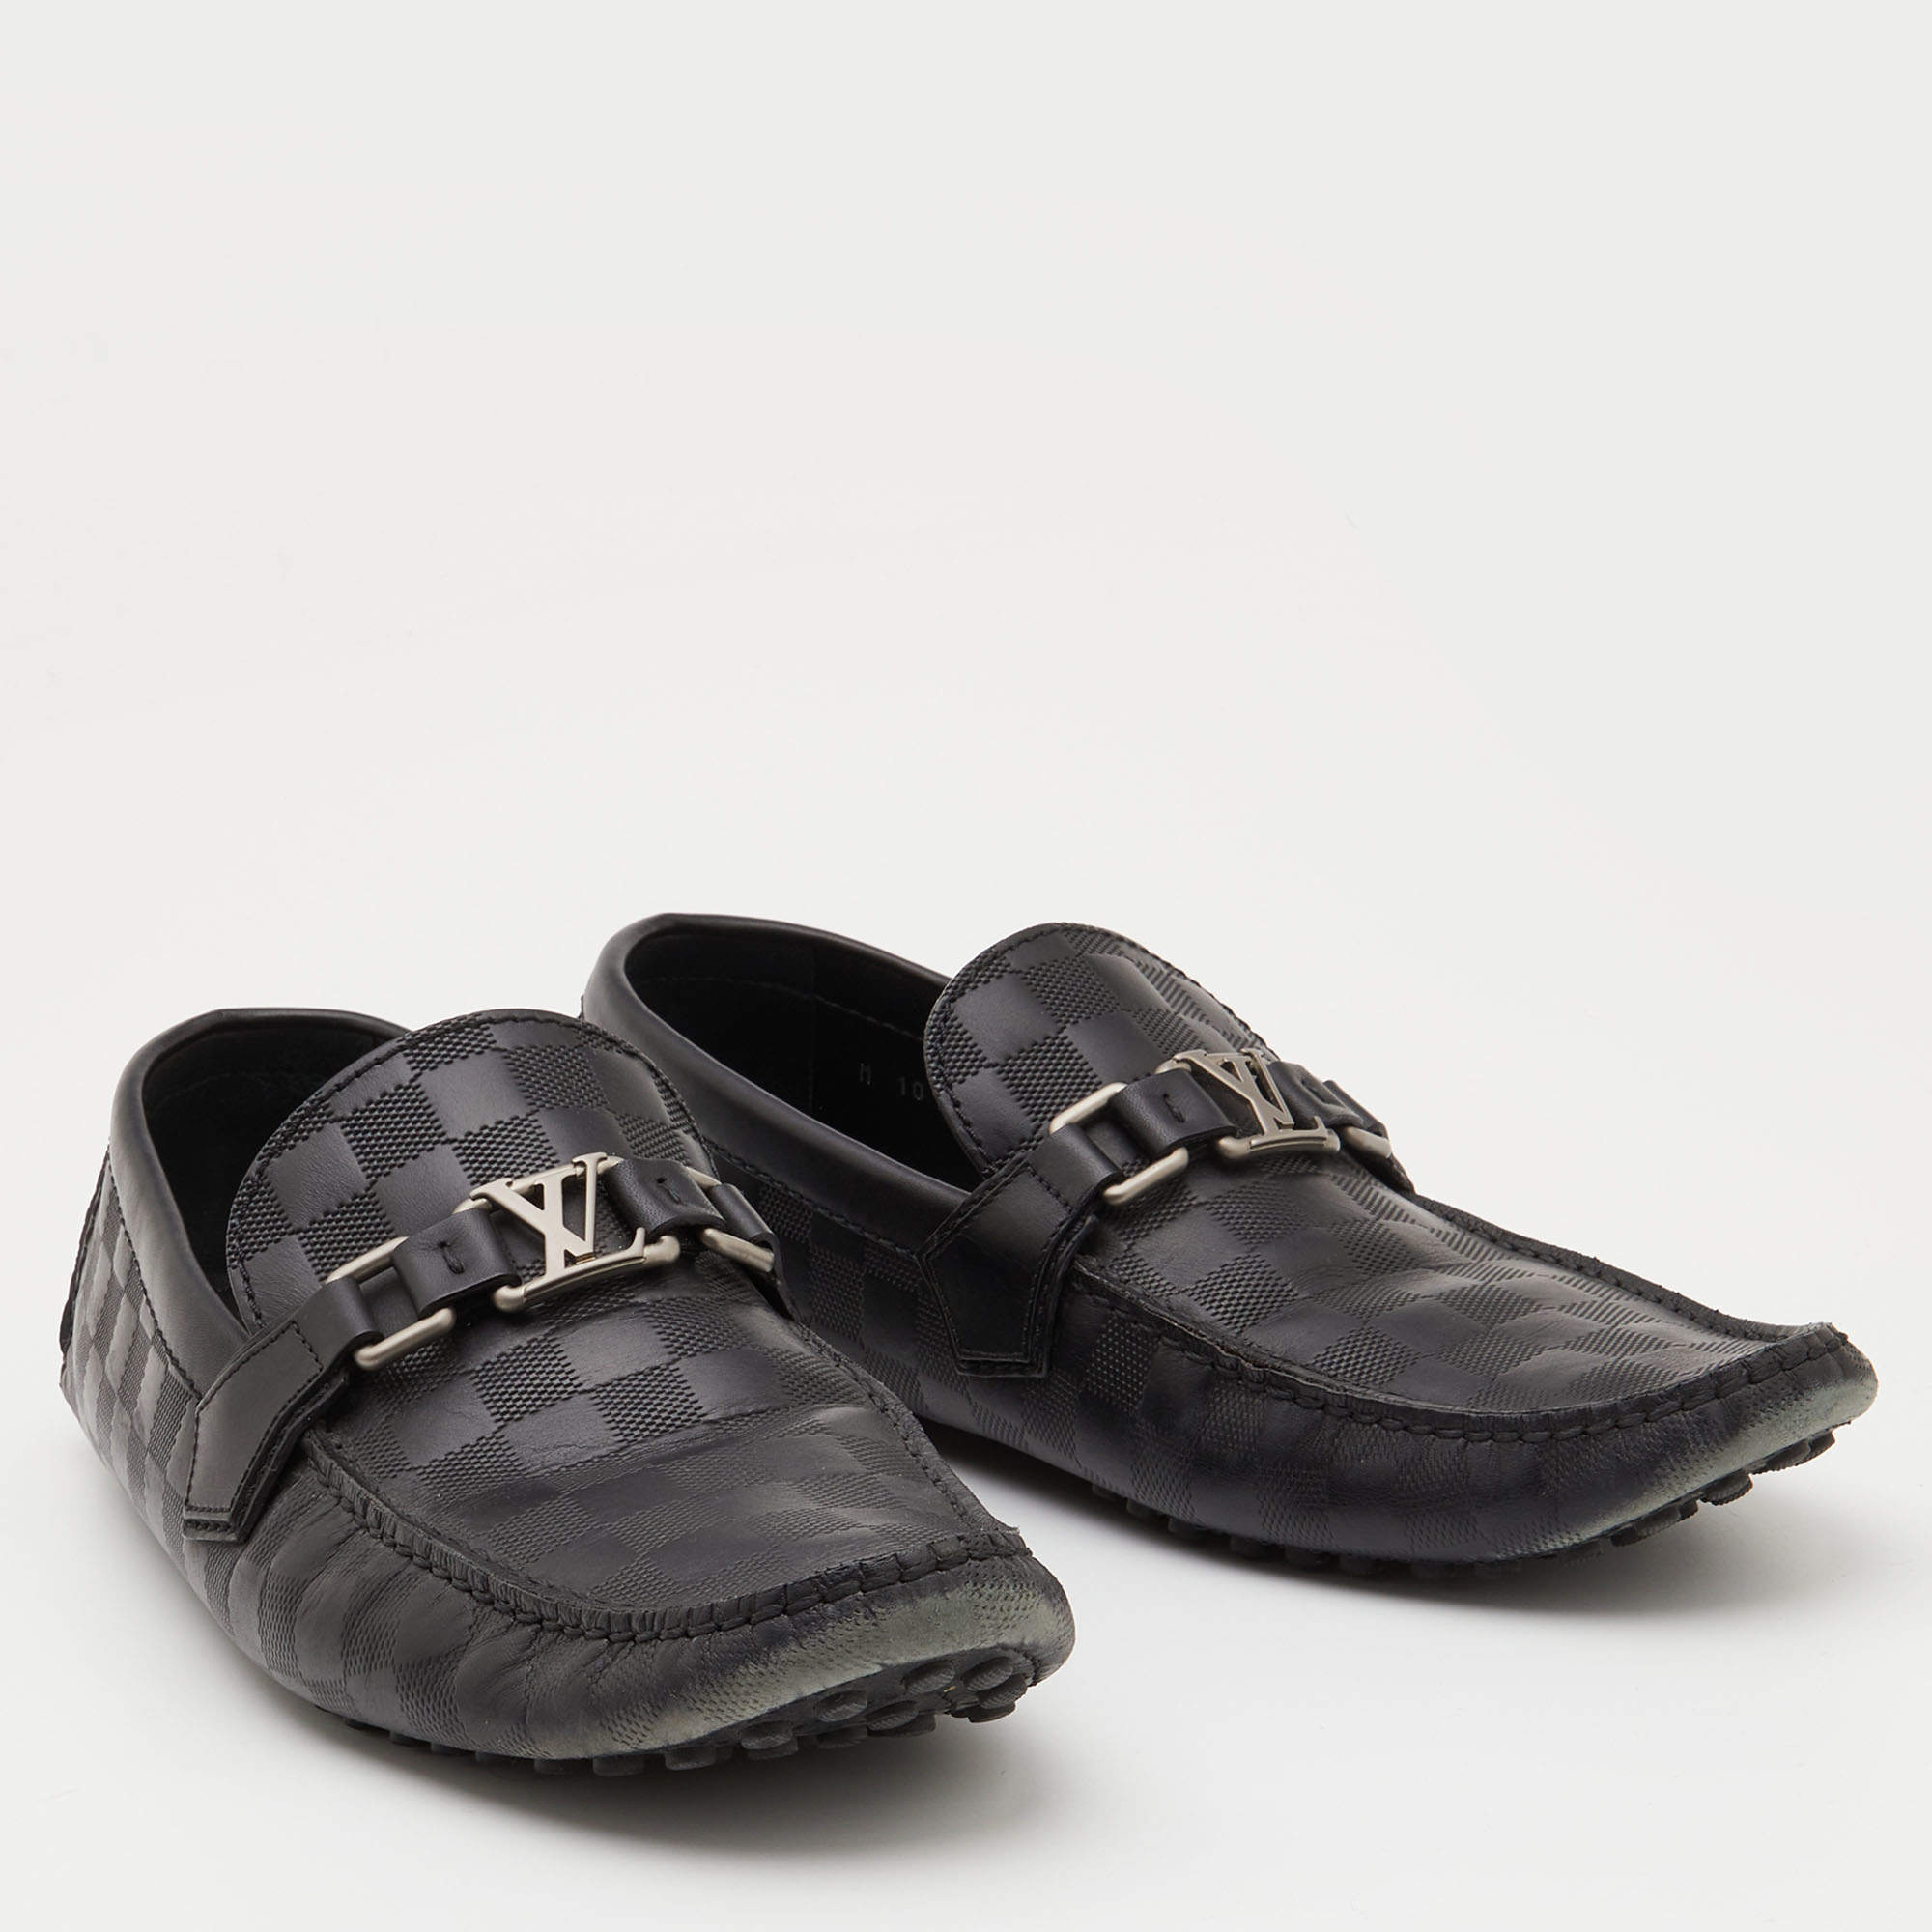 Shop Louis Vuitton DAMIER 2022 SS Loafers Street Style Plain Leather Logo  Loafers & Slip-ons (1A9KB1 / 1A9KBA, 1A9KAV / 1A9KAY, 1A9KAP / 1A9KAS,  1A9KAJ / 1A9KAM, 1A9KAD / 1A9KAG, 1A9KCJ, 1A9KCD /